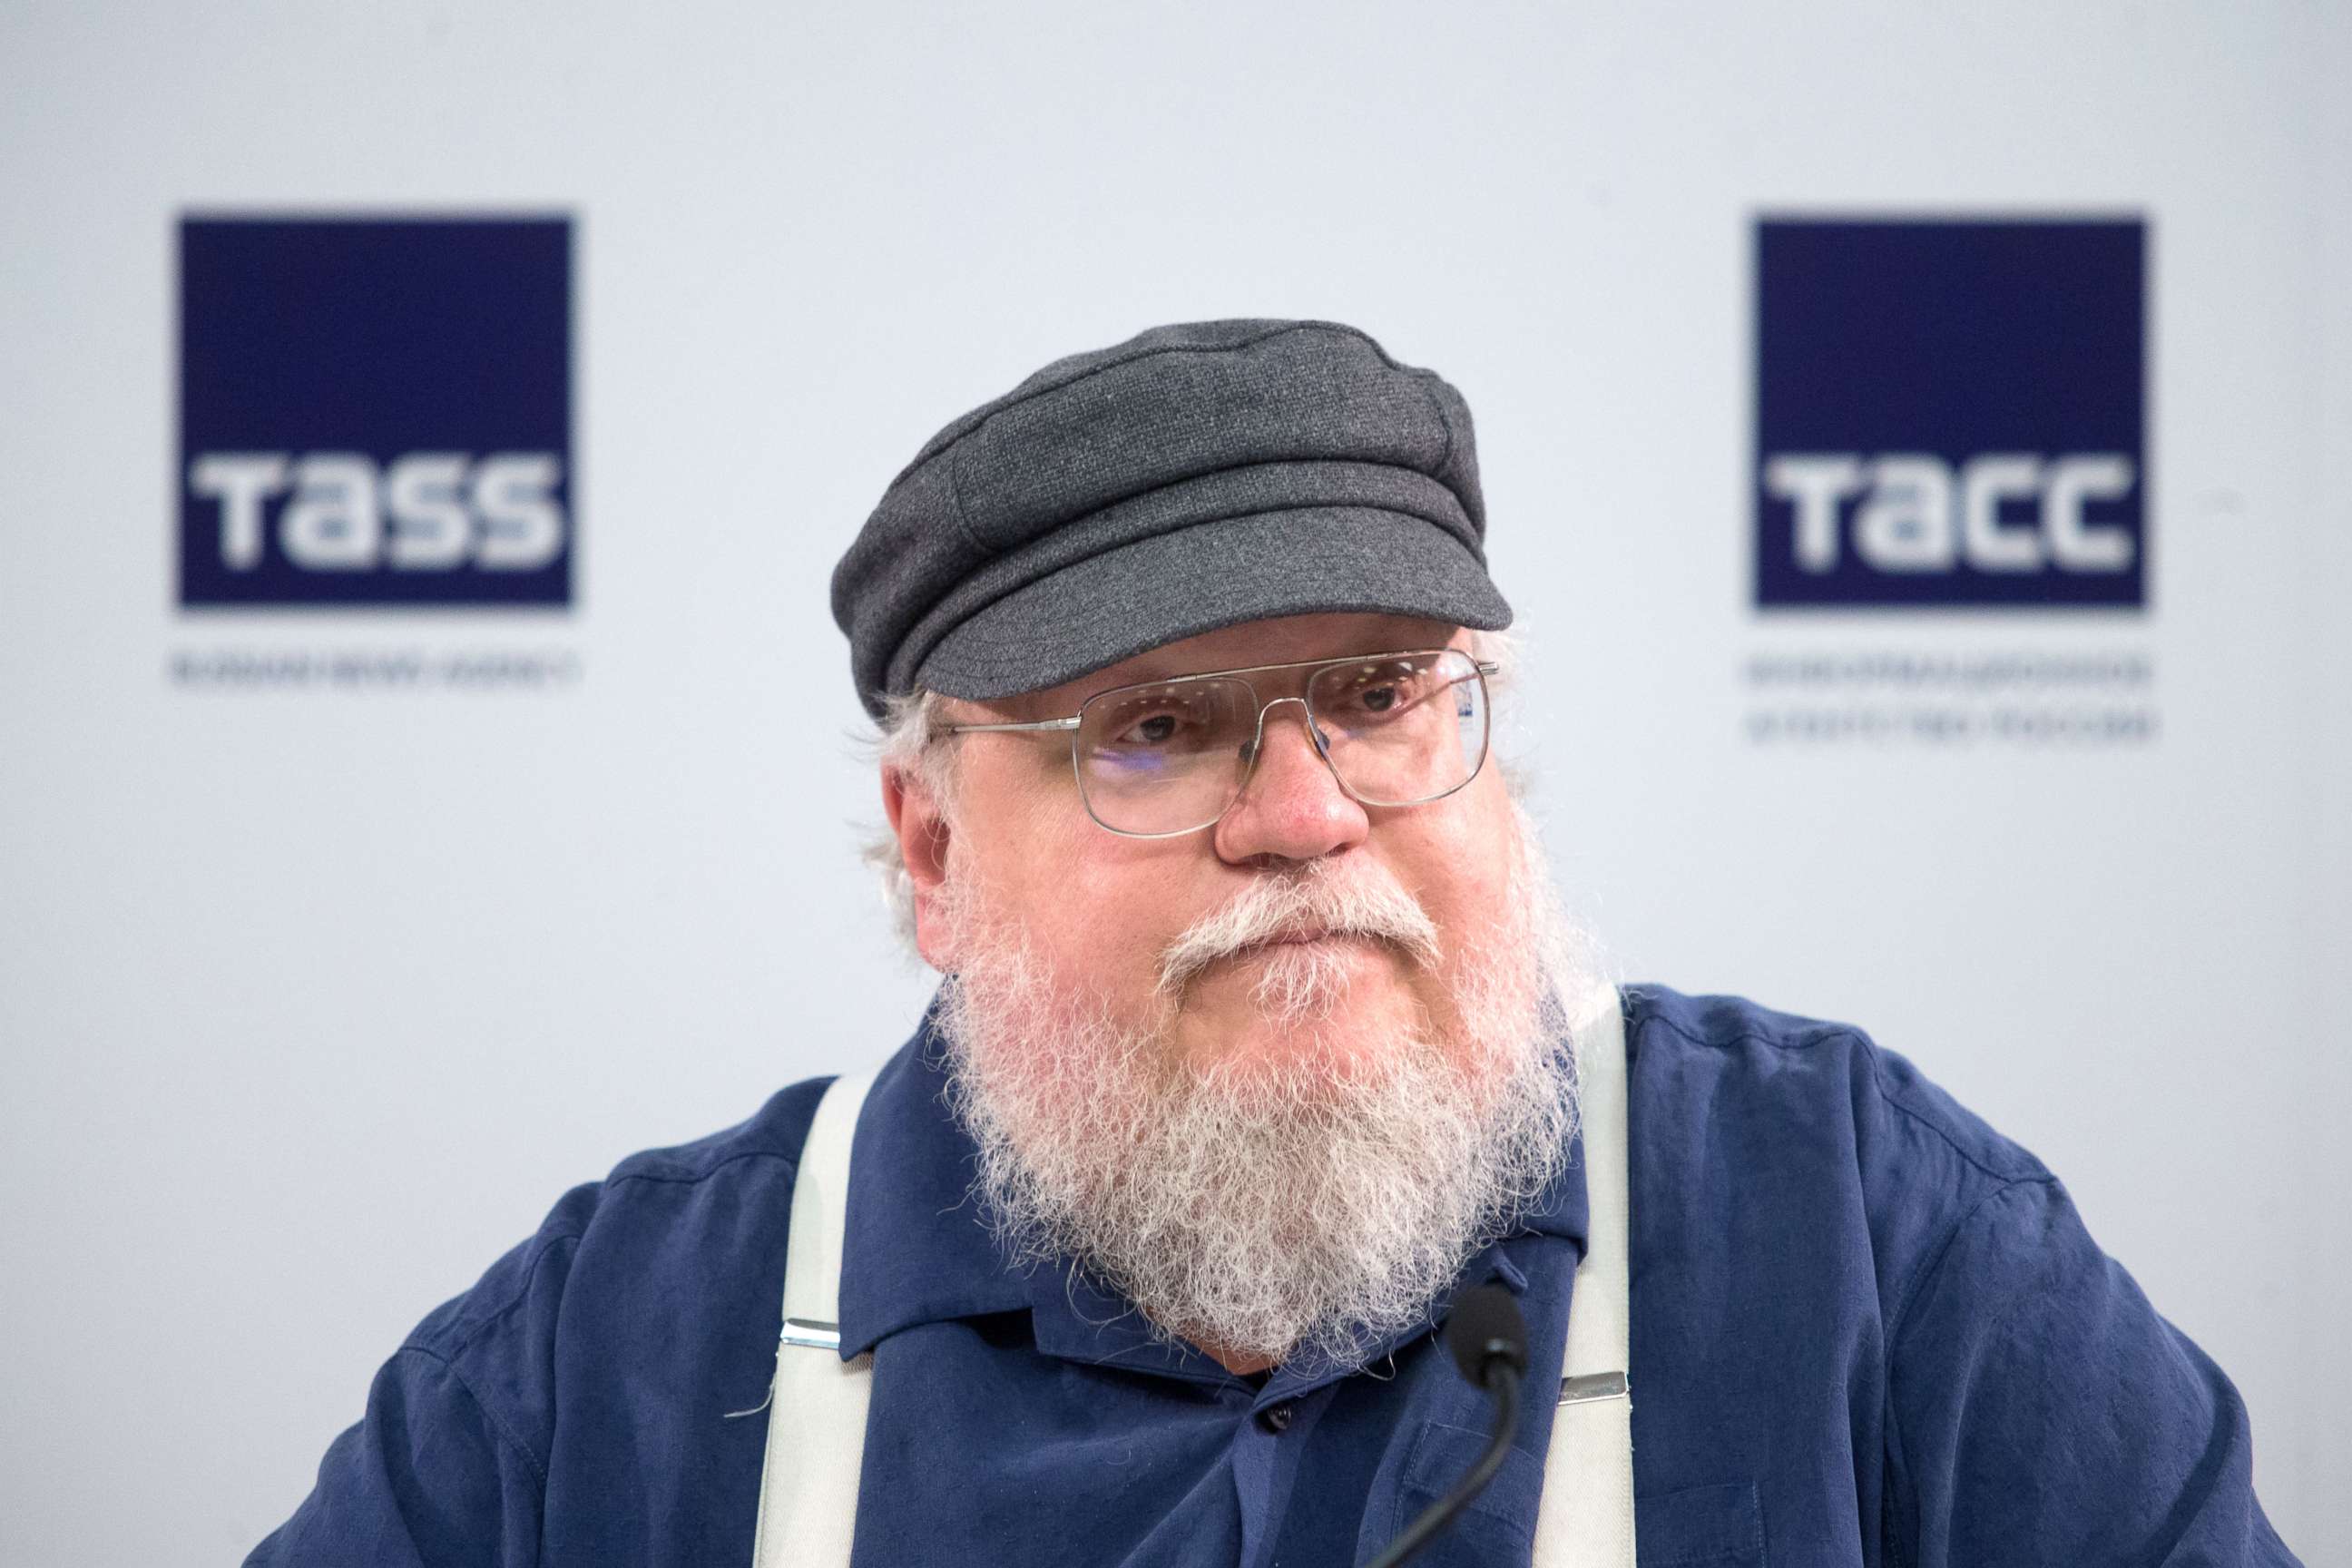 PHOTO: American novelist and short-story writer, screenwriter, and television producer George R. R. Martin attends a press conference, Aug. 16, 2017, in Saint Petersburg, Russia.